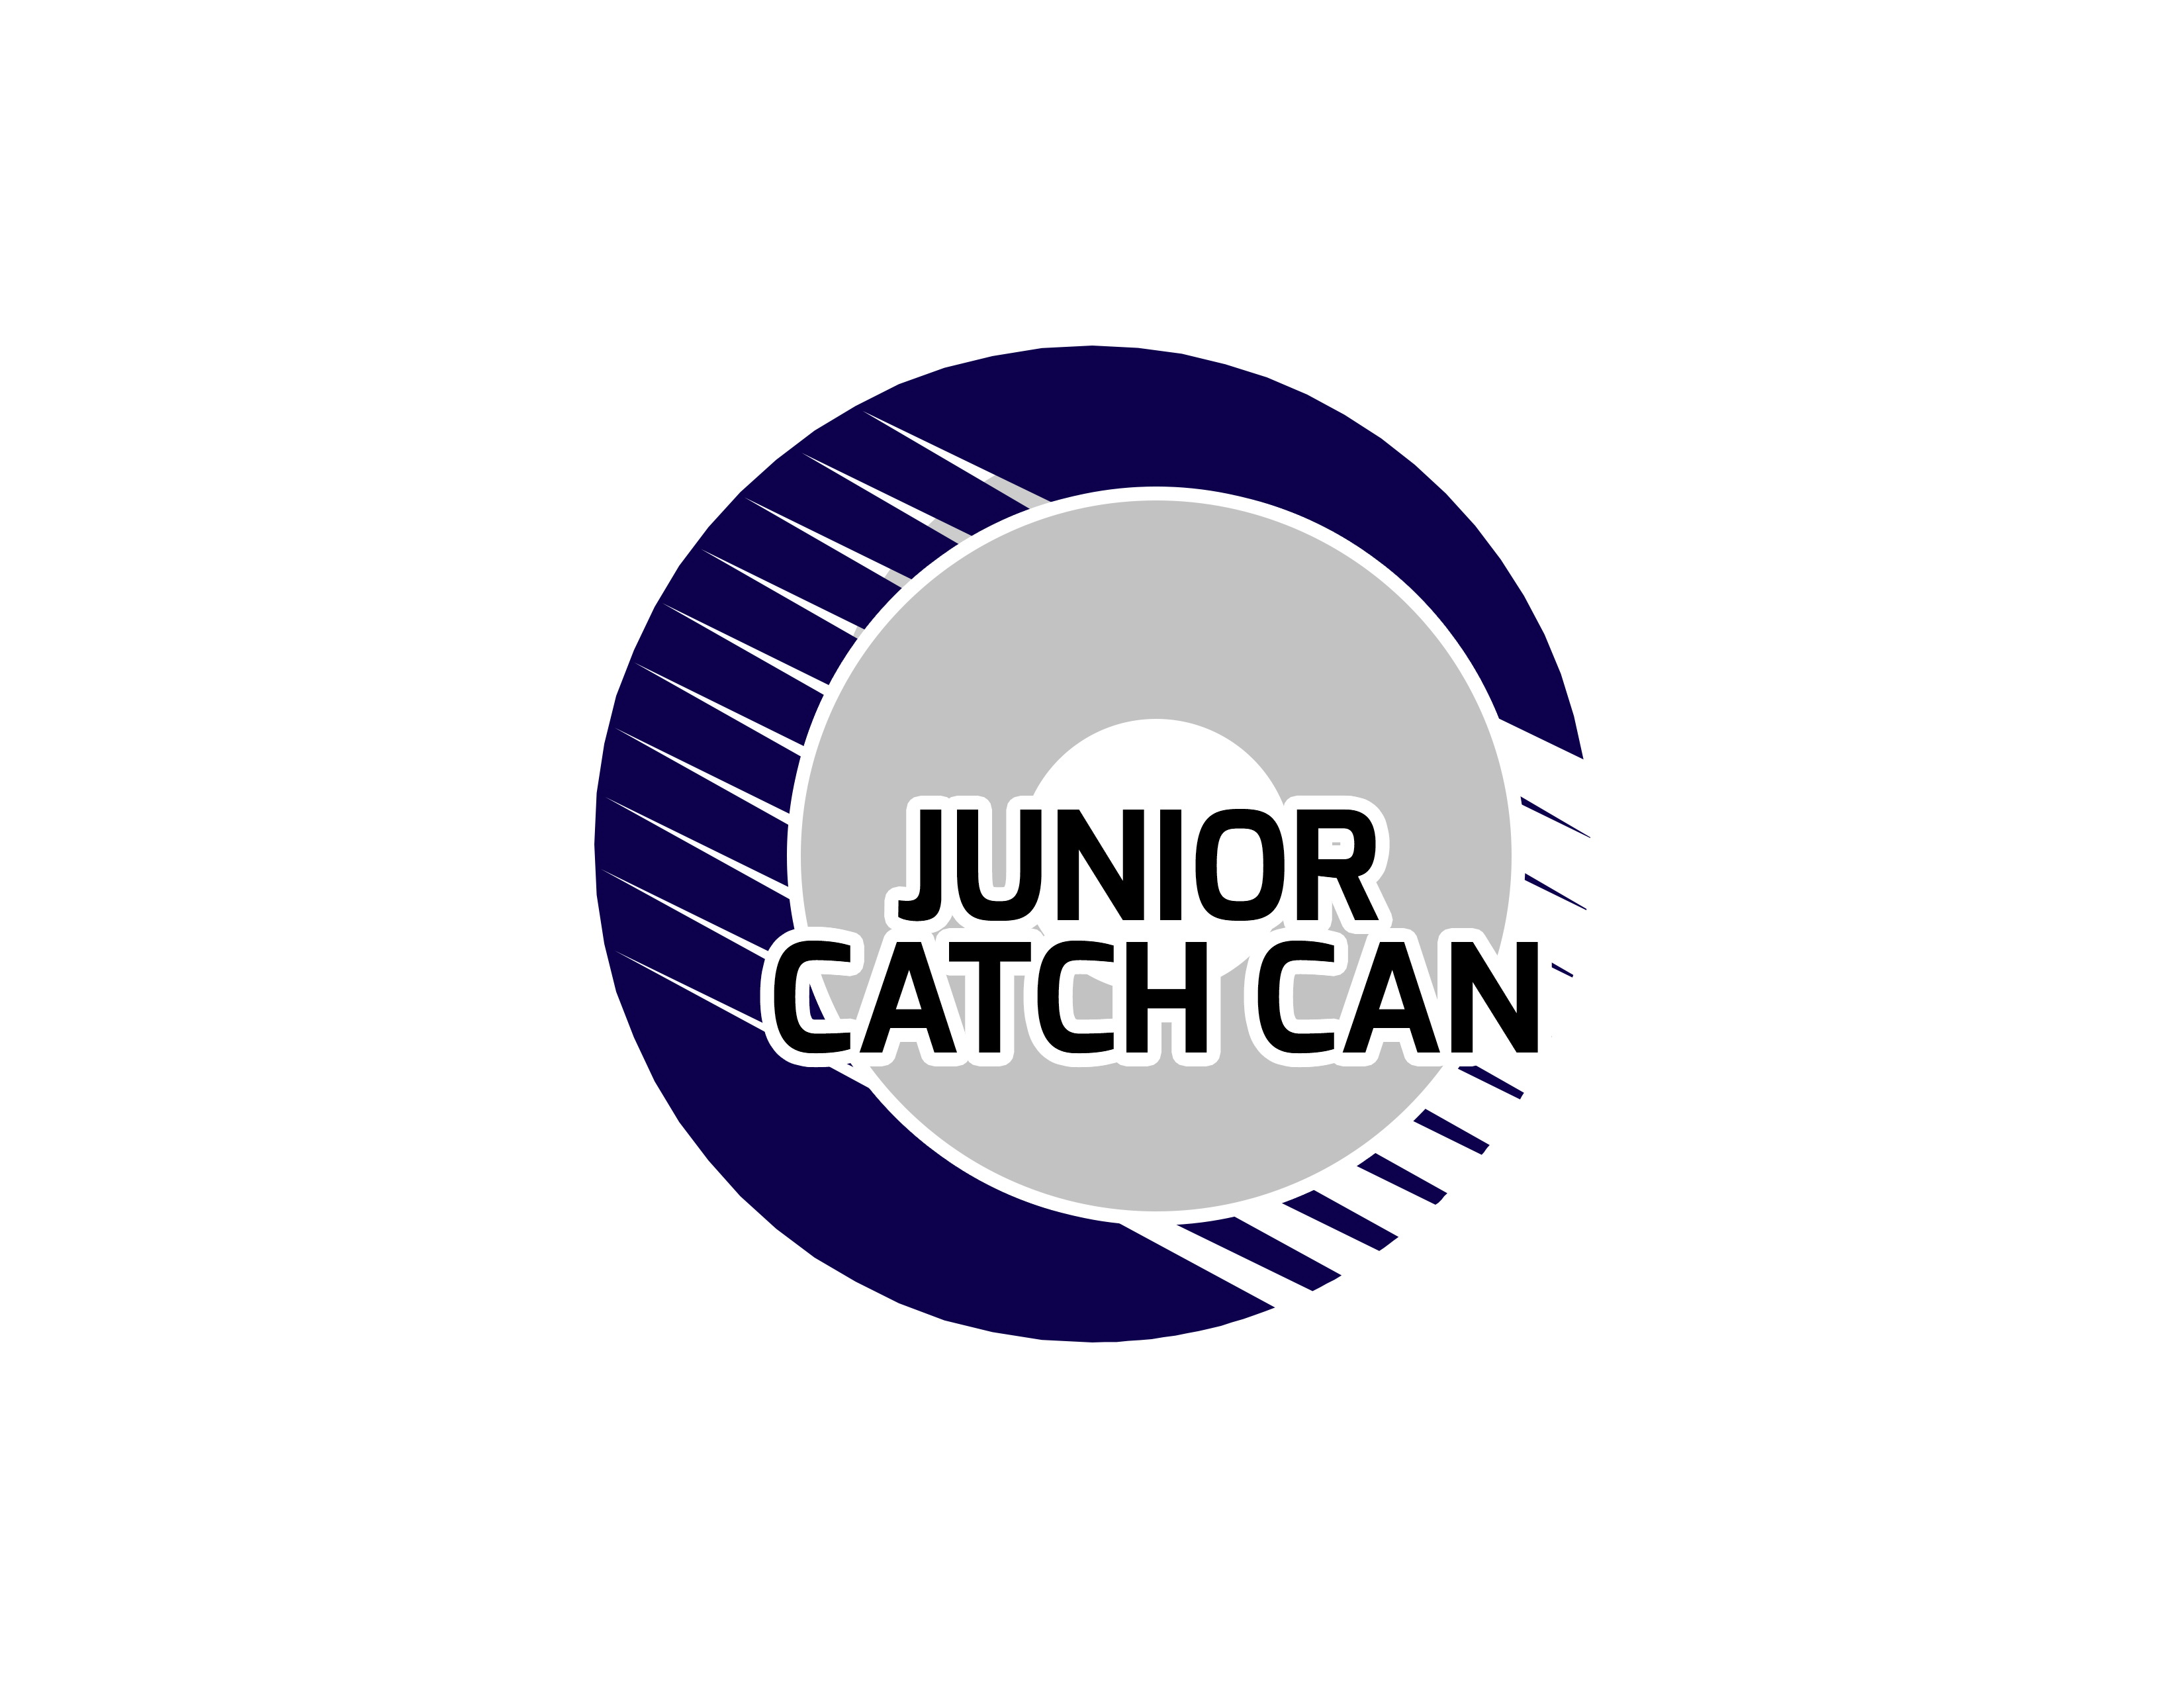 Junior Catch Can helps in making sure that items do not fall into the drilling rig